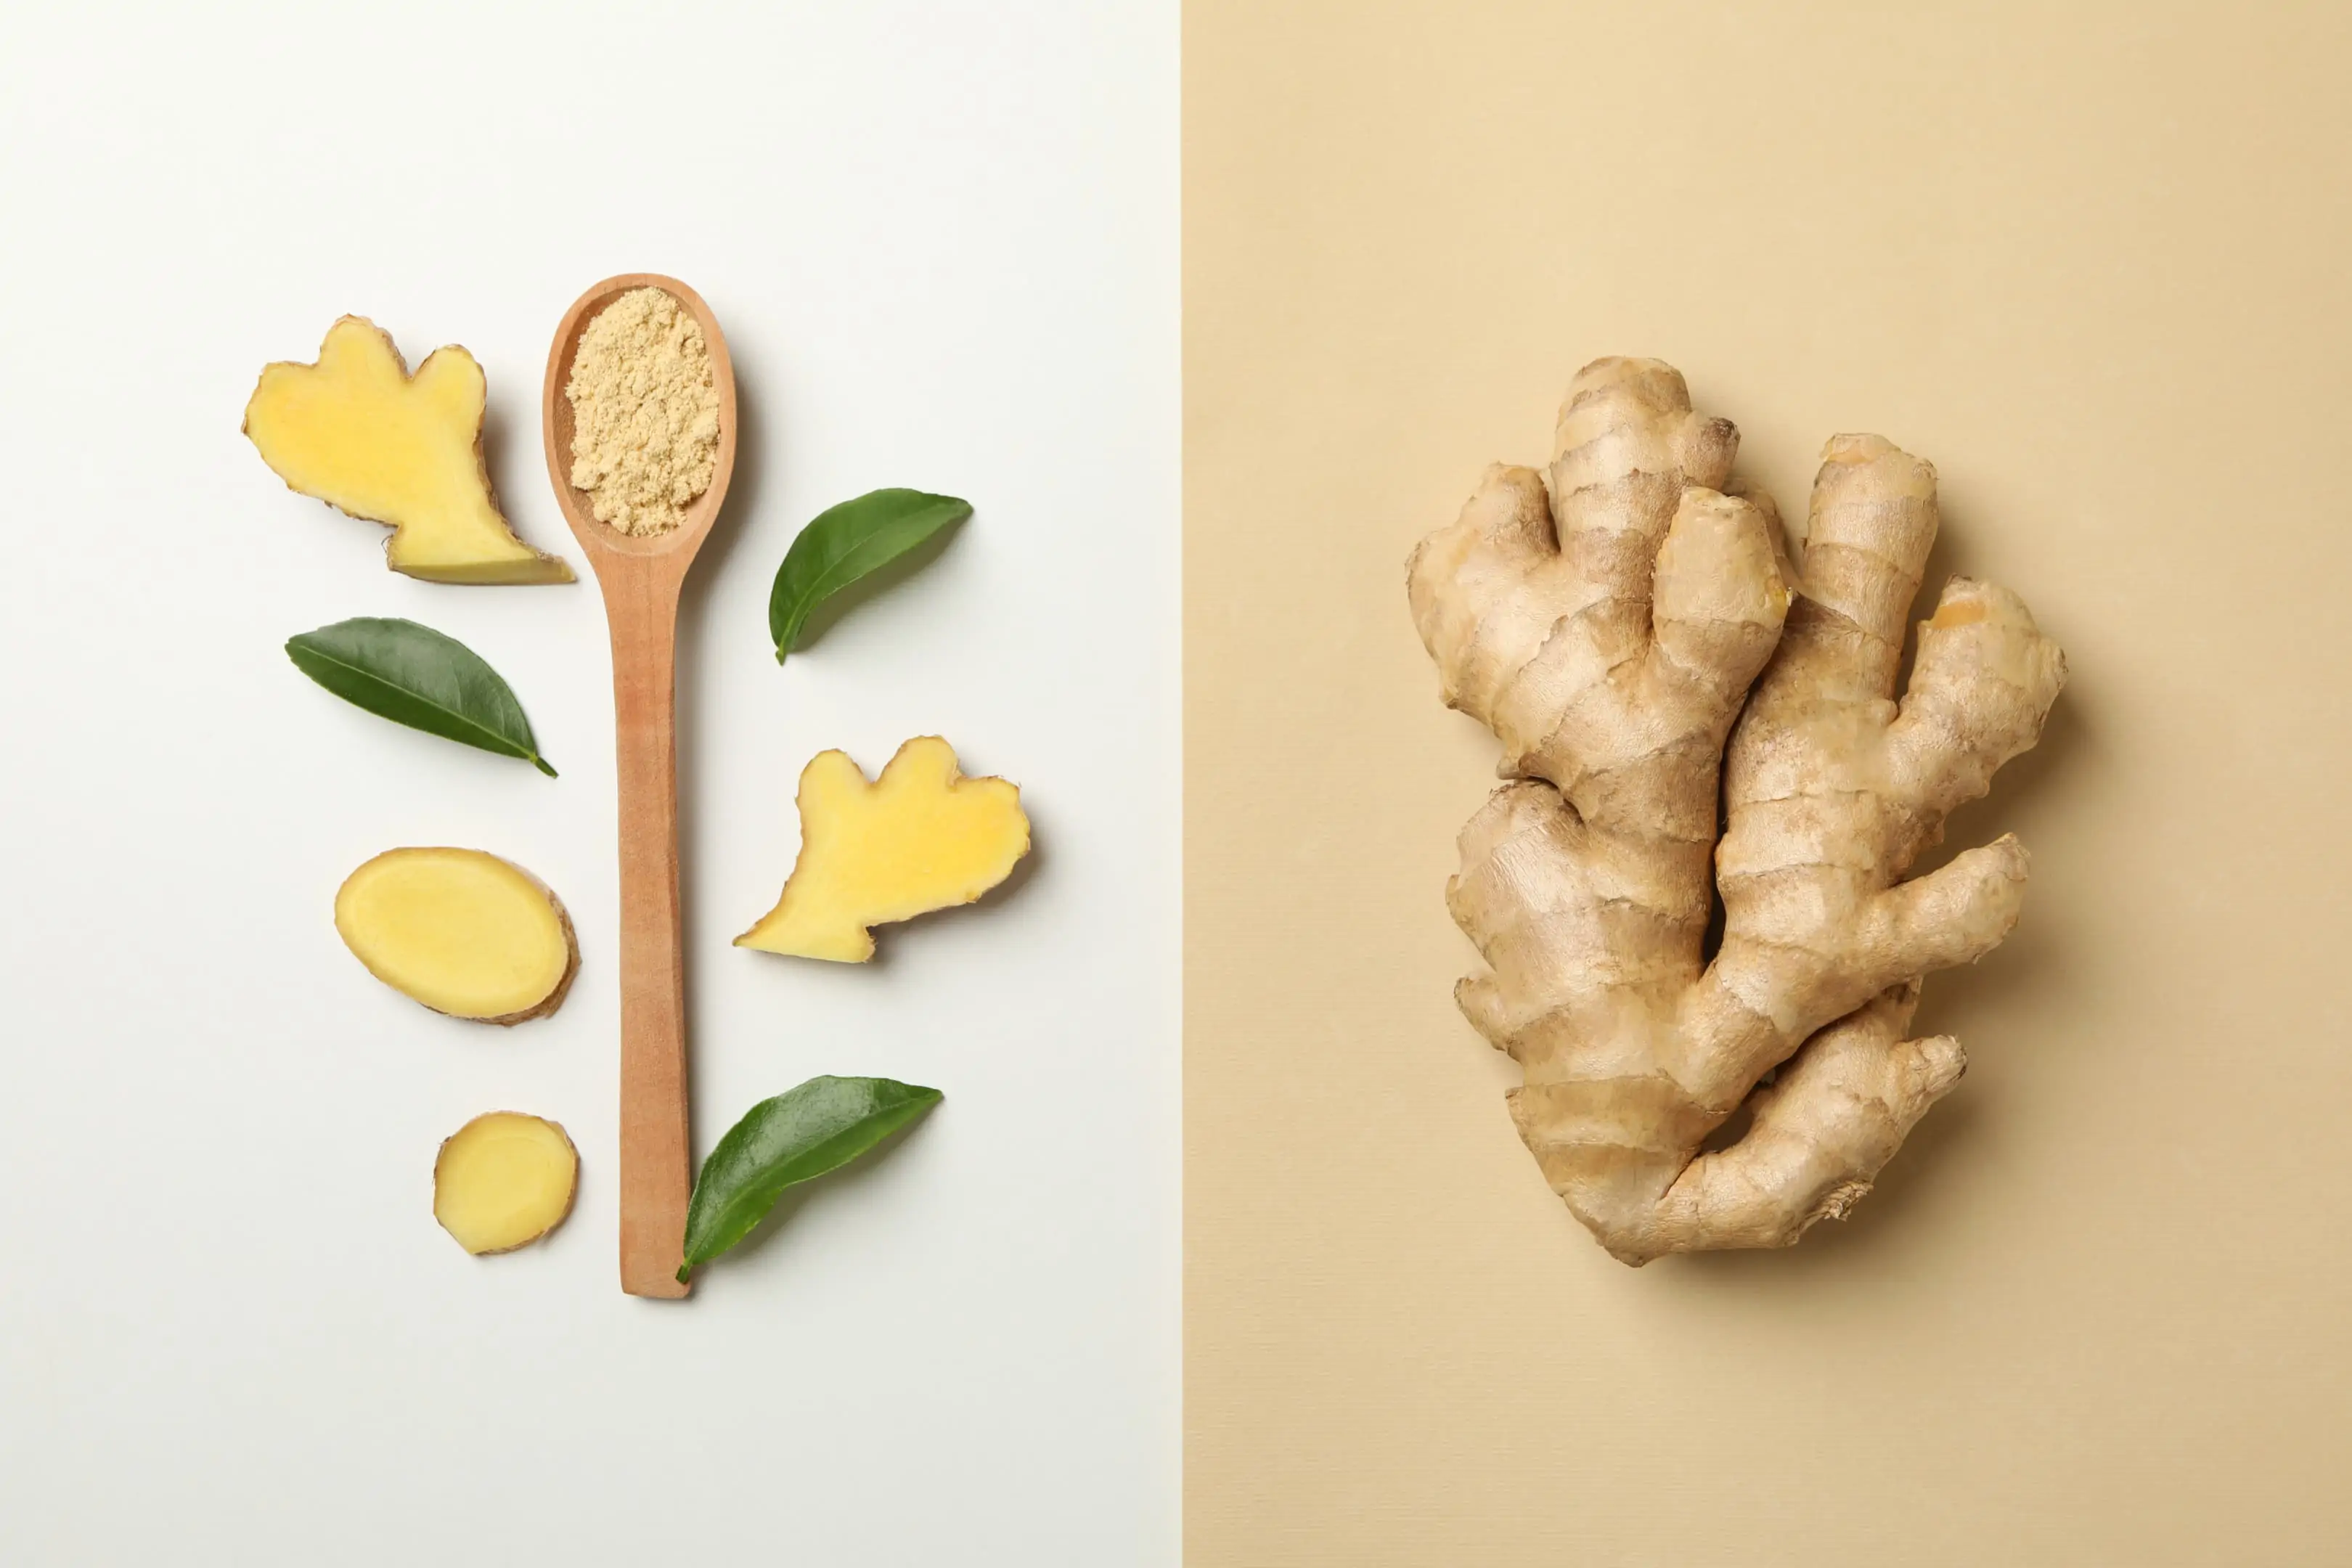 Ginger — spoon with ginger powder and whole ginger root